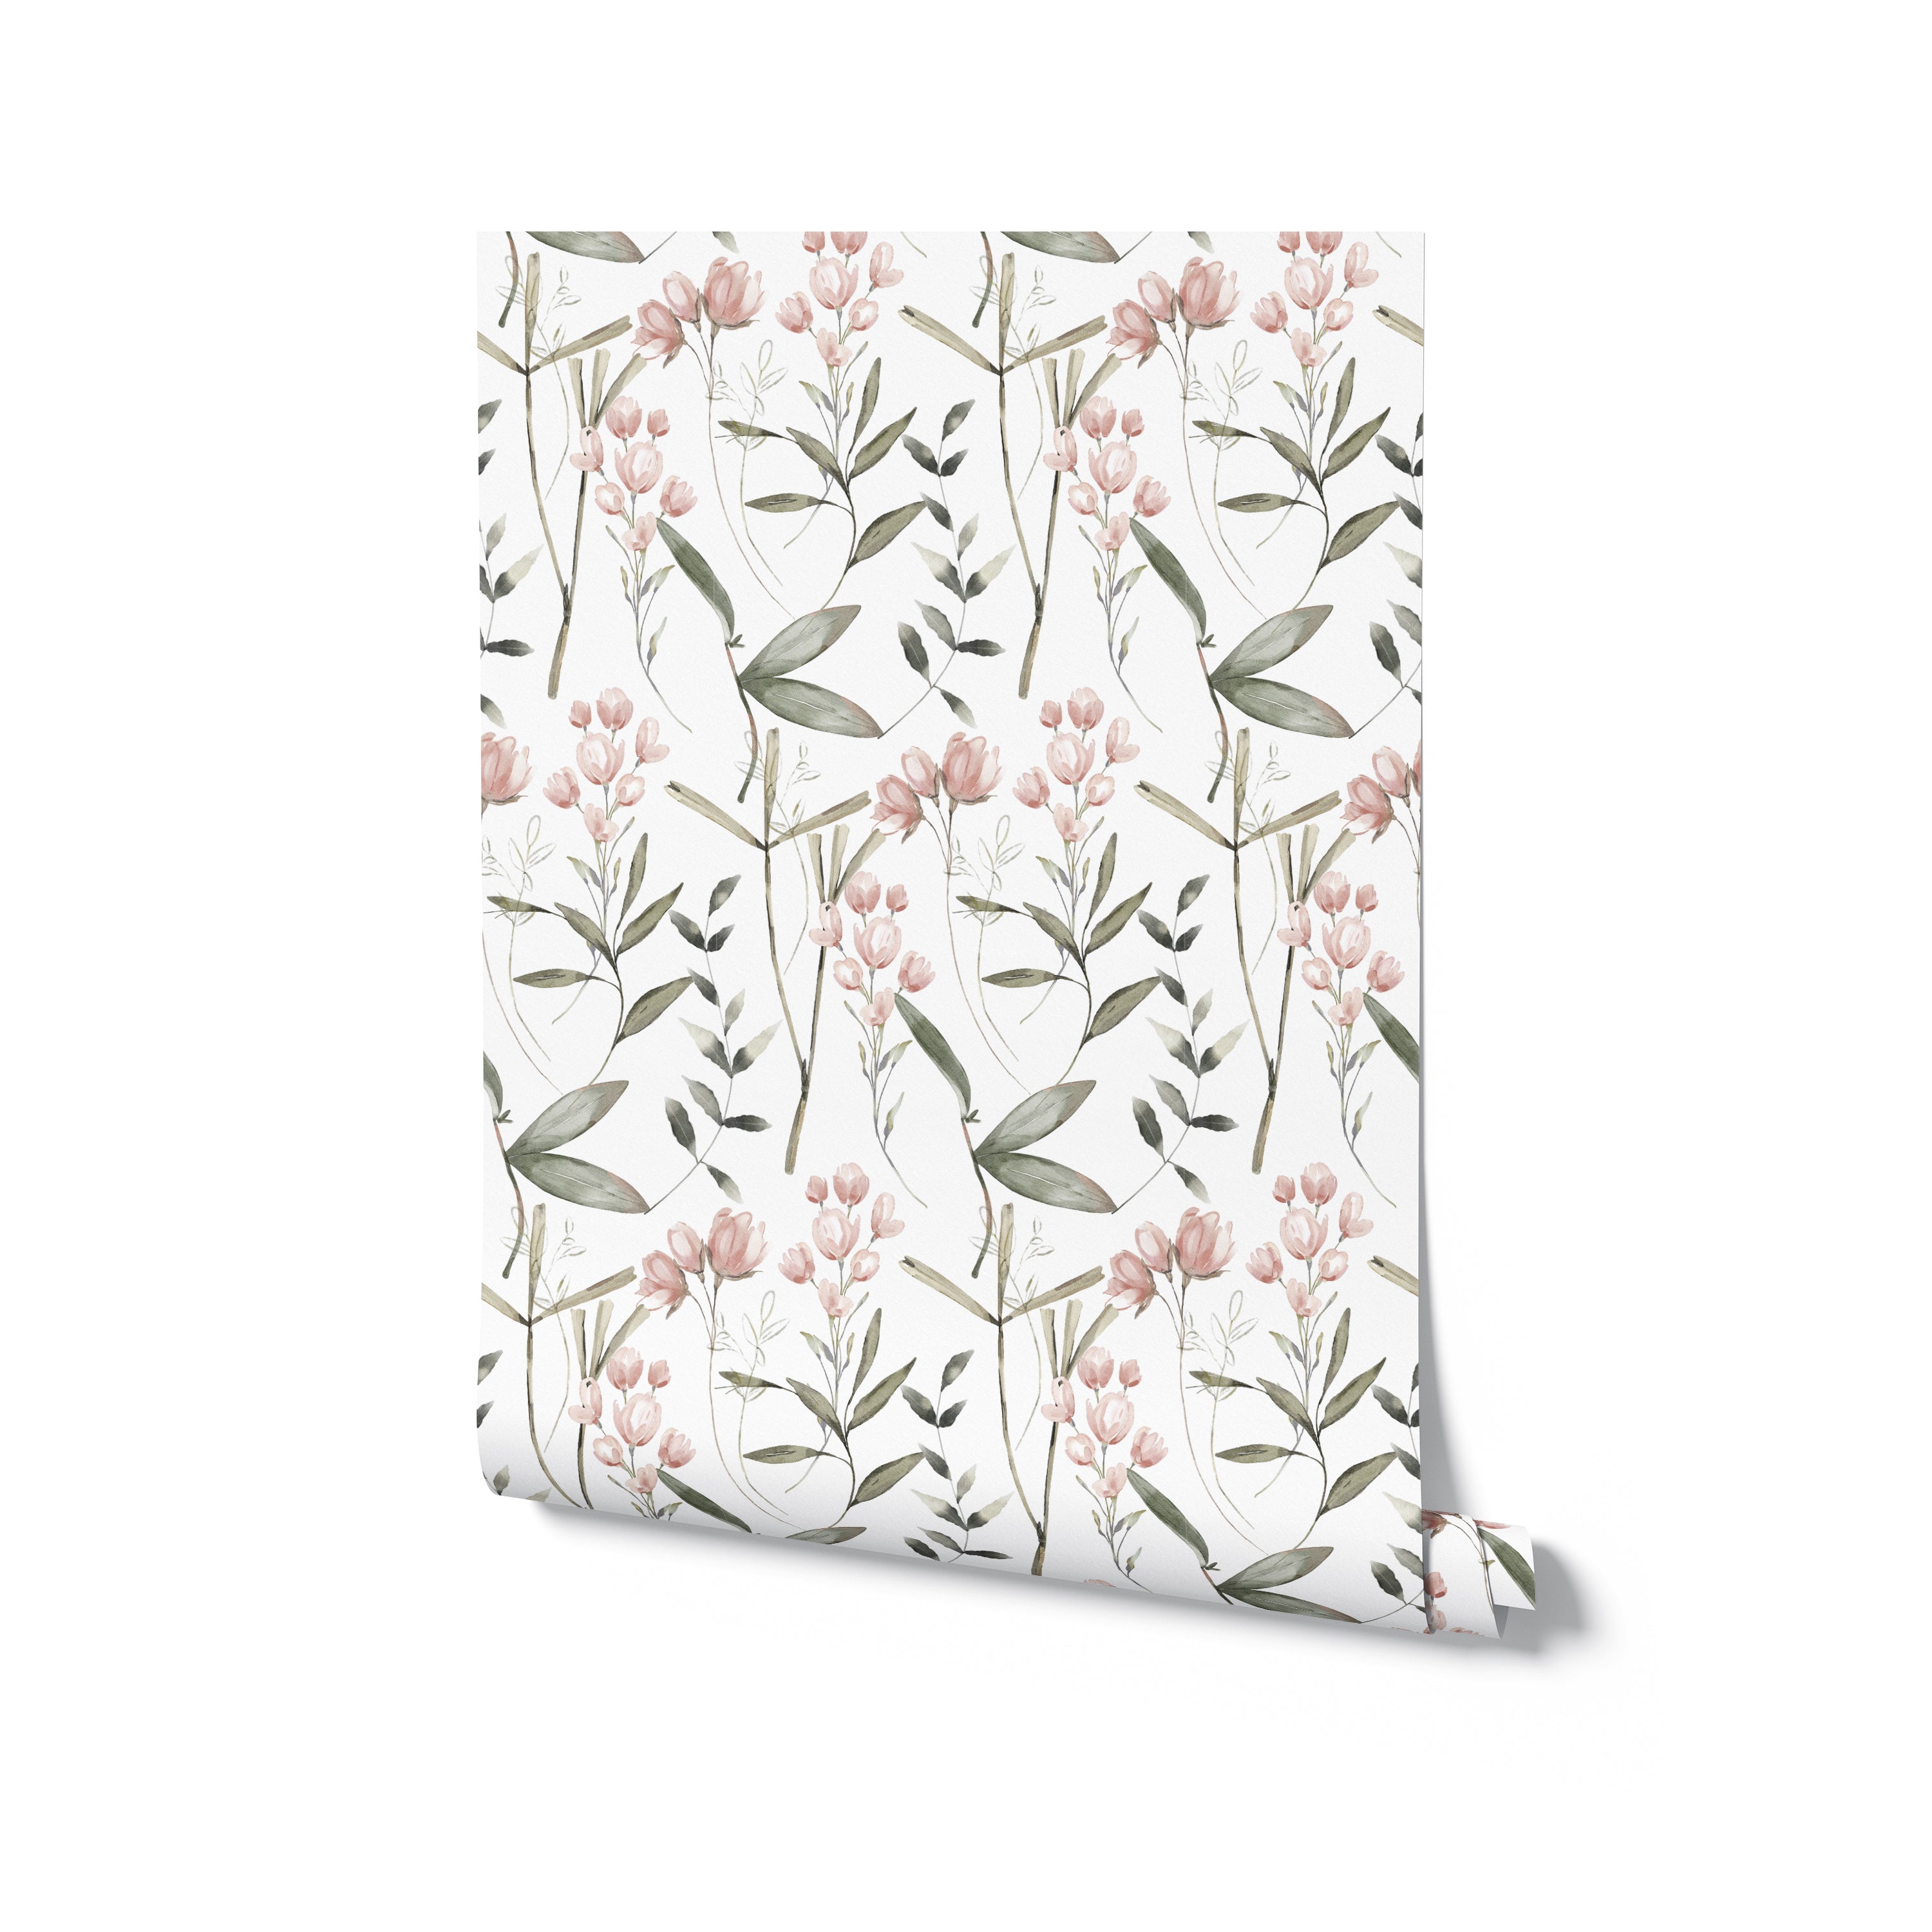 A roll of Springtime Sonata Wallpaper partially unrolled to display its beautiful floral pattern of pink tulips and green leaves on a white background. This wallpaper roll exemplifies elegance and the beauty of spring, ideal for adding a touch of nature-inspired decor to any room.